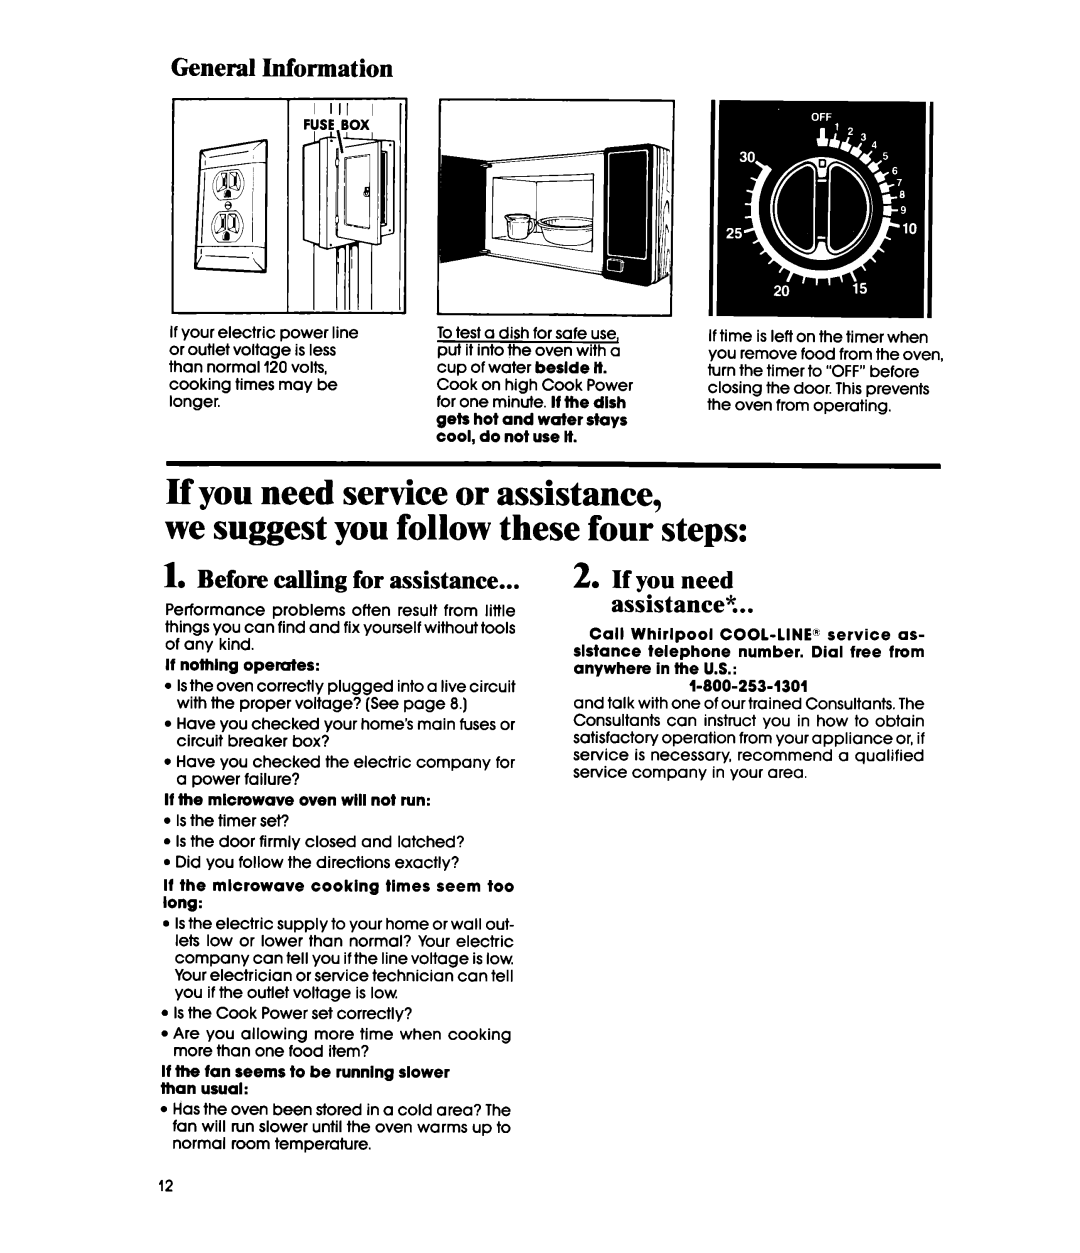 Whirlpool MW1200XS manual If you need service or assistance, we suggest you follow these four steps, General Information 